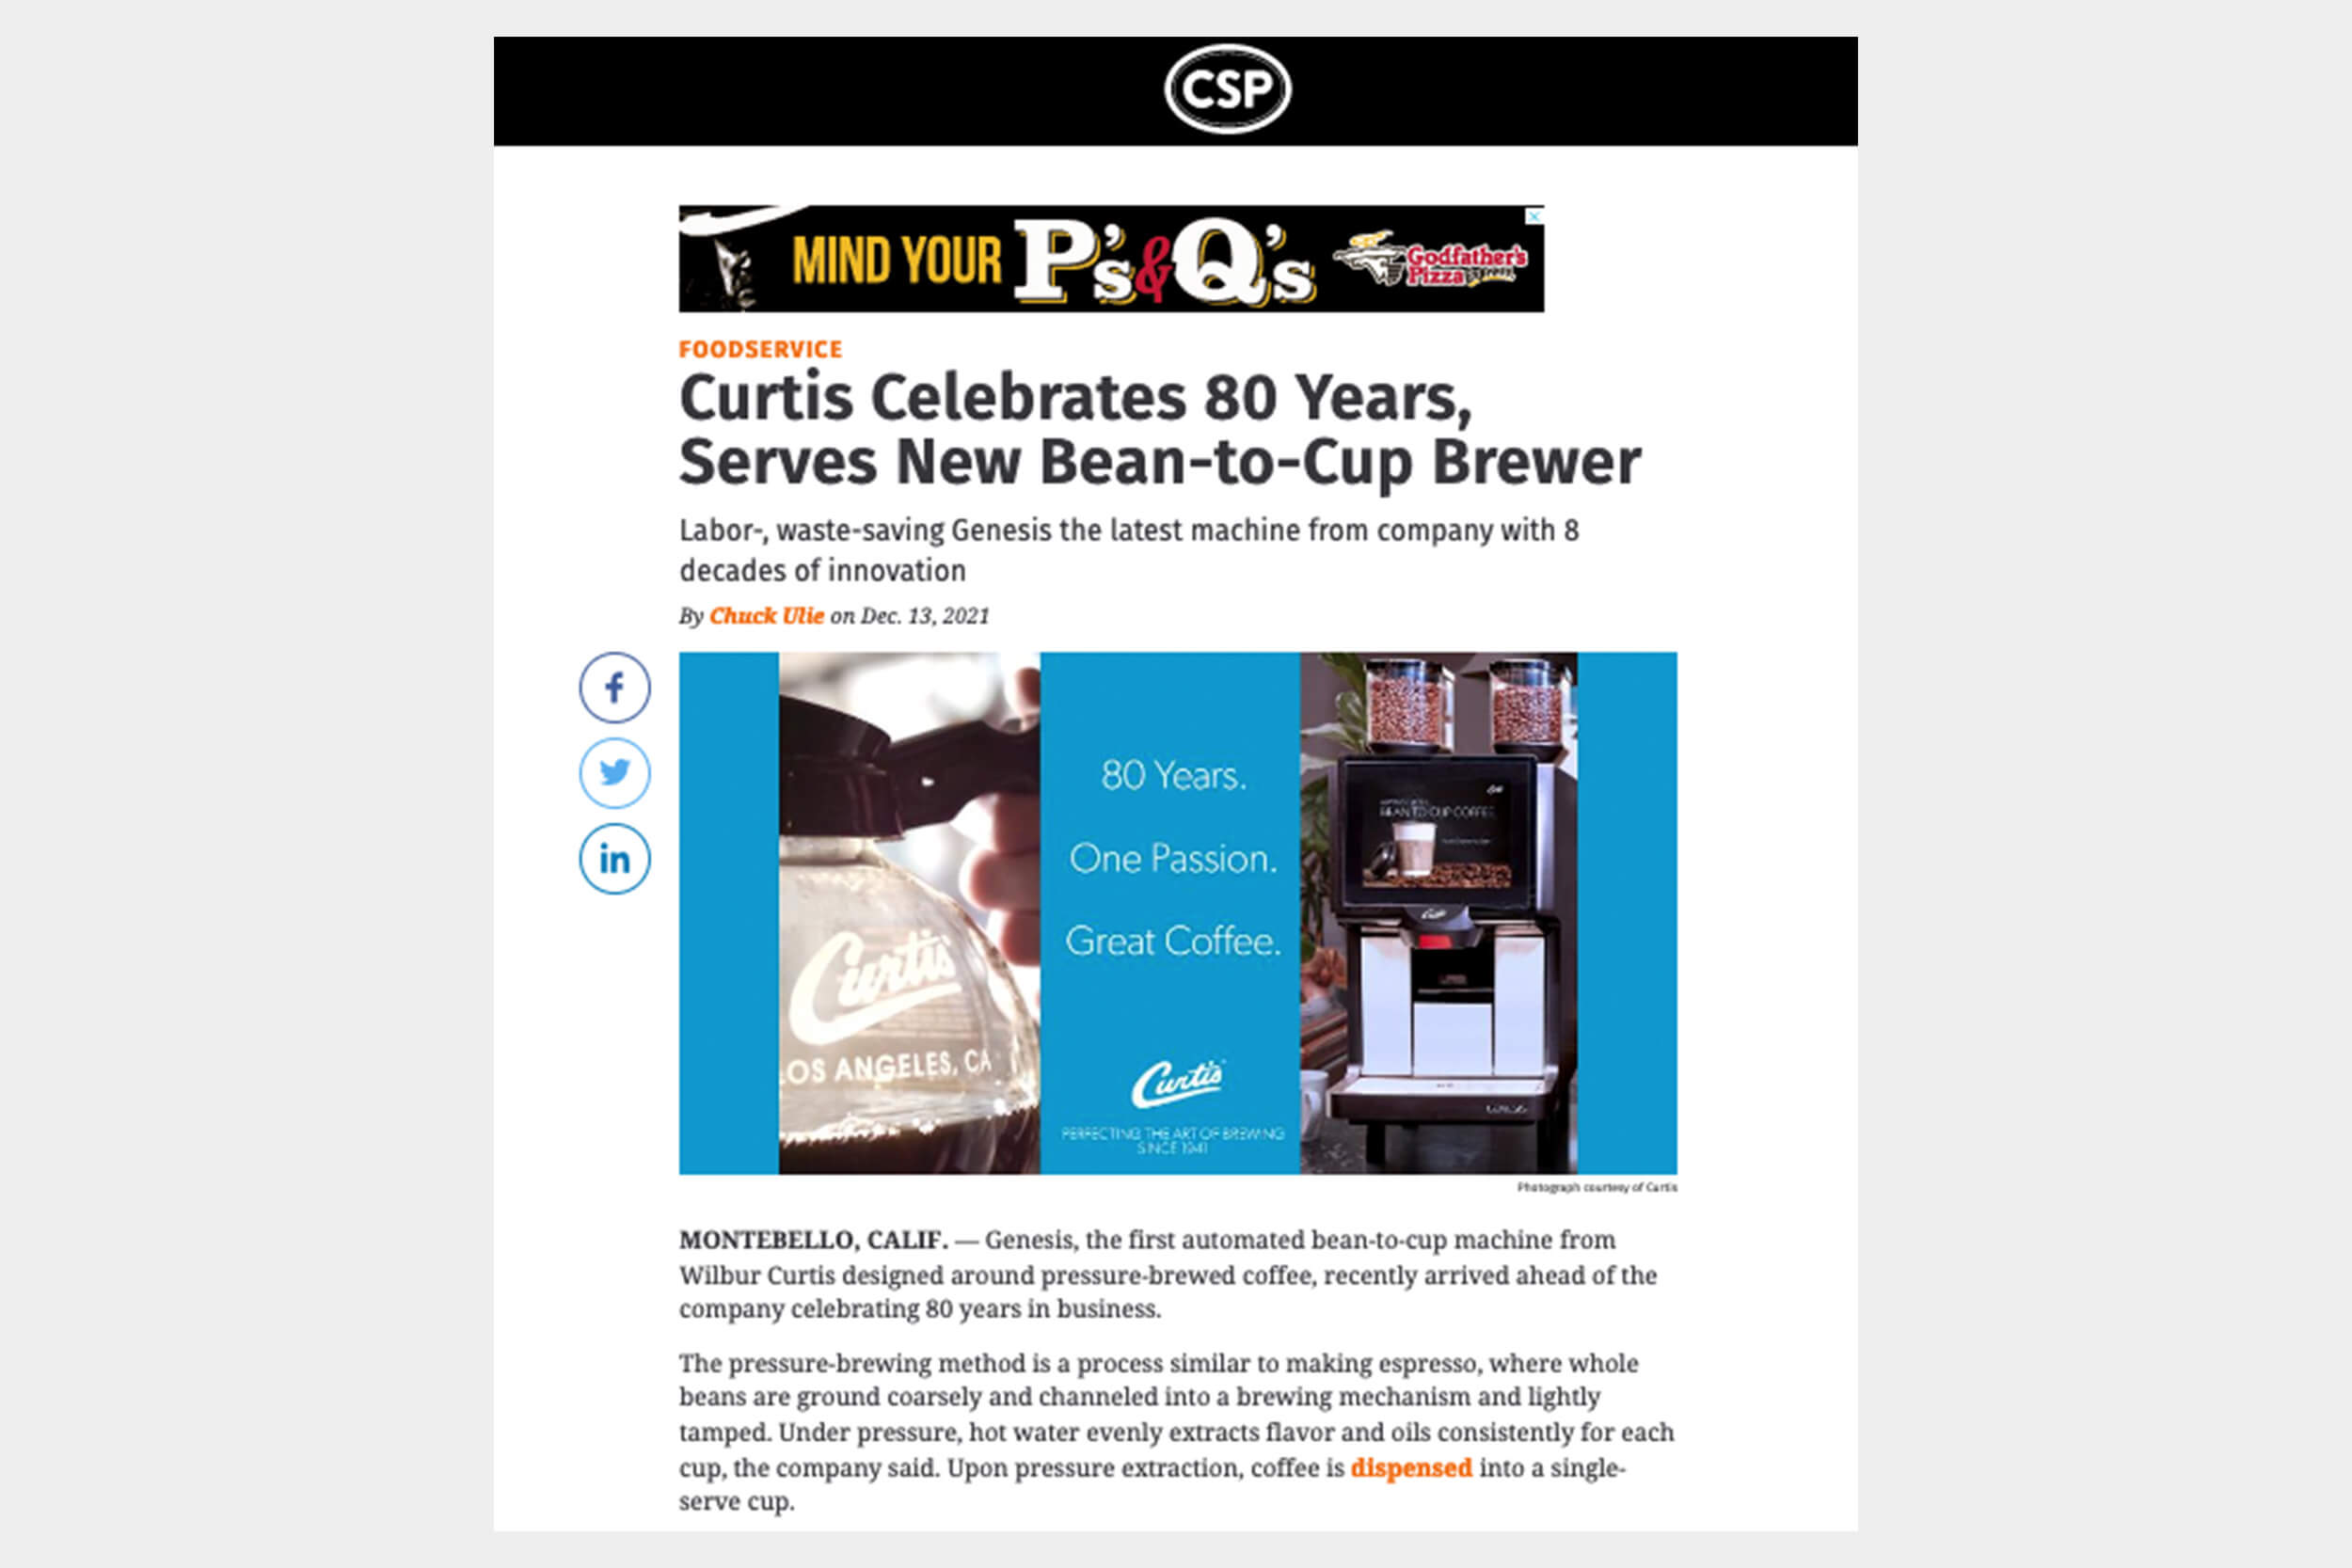 Curtis celebrates 80. Serves new bean-to-cup brewer